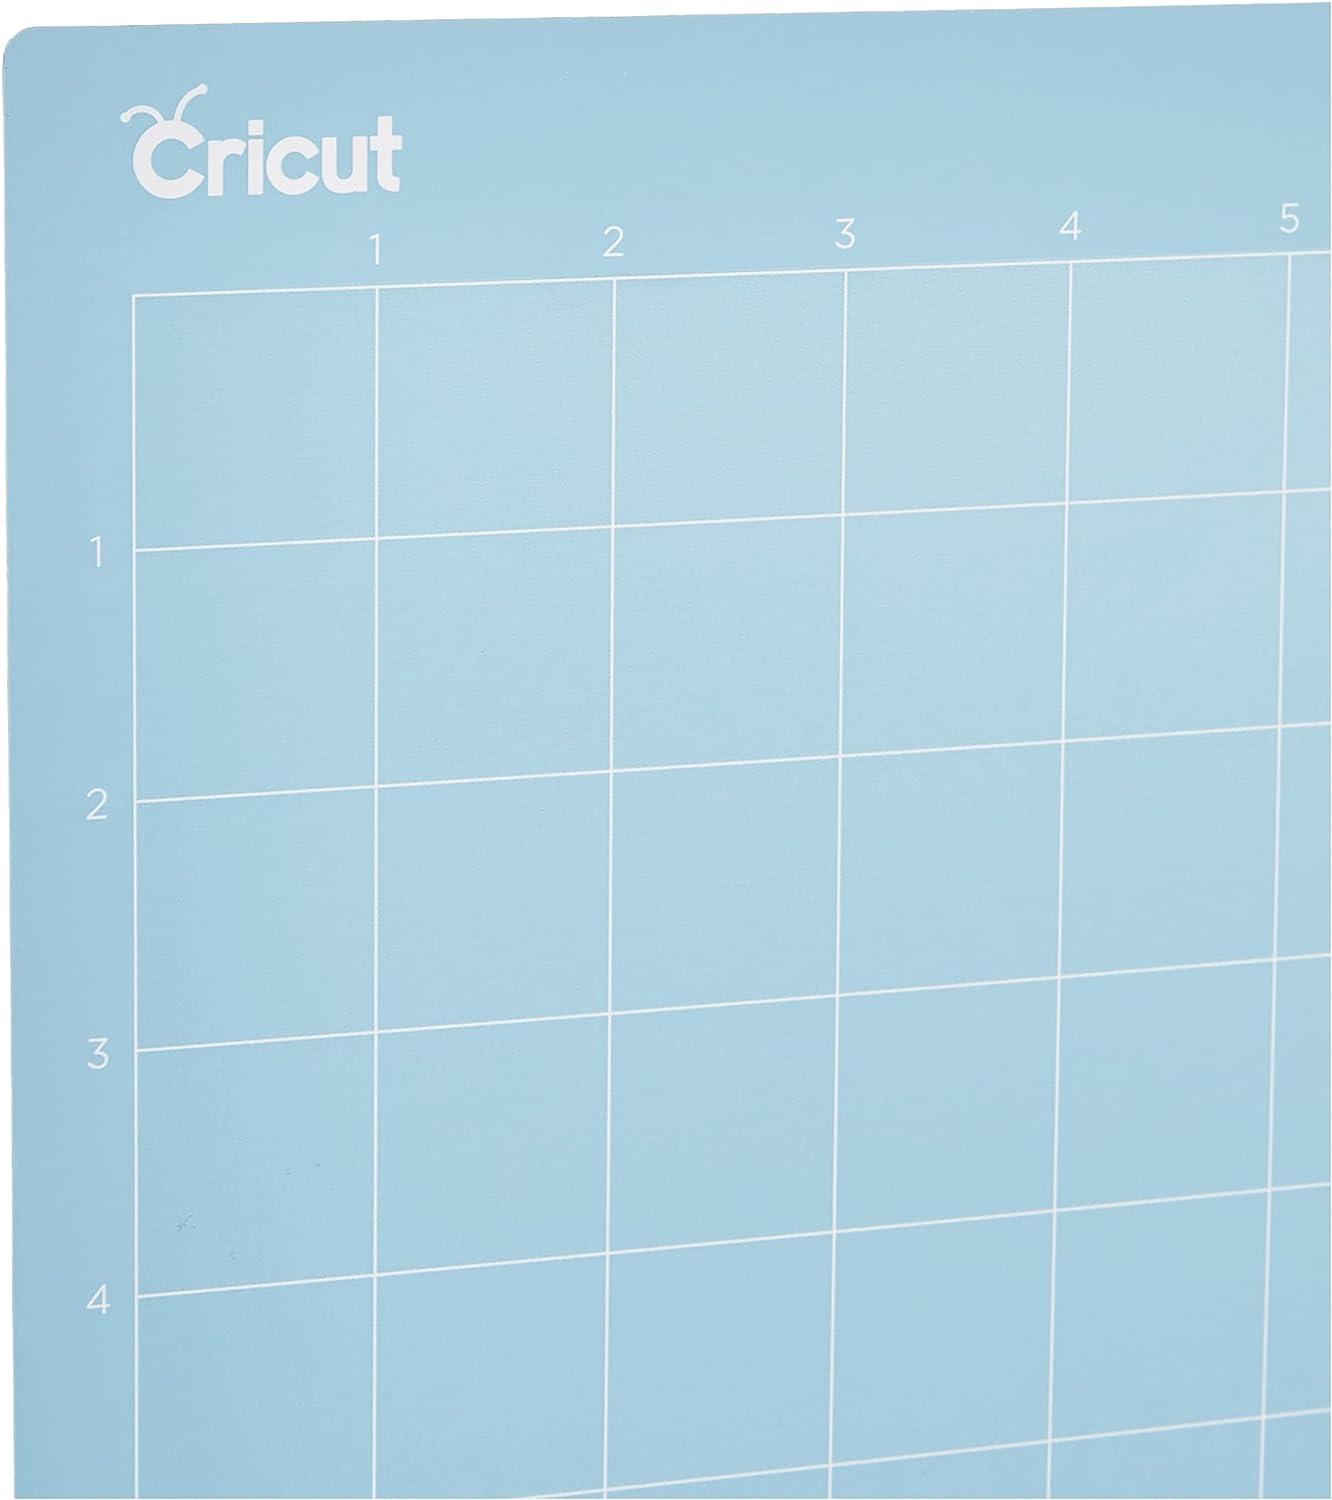 Cricut LightGrip Cutting Mats 12in x 24in, Reusable Cutting Mats for Crafts  with Protective Film, Use with Printer Paper, Vellum, Light Cardstock &  More for Cricut Explore & Maker (1 Count)